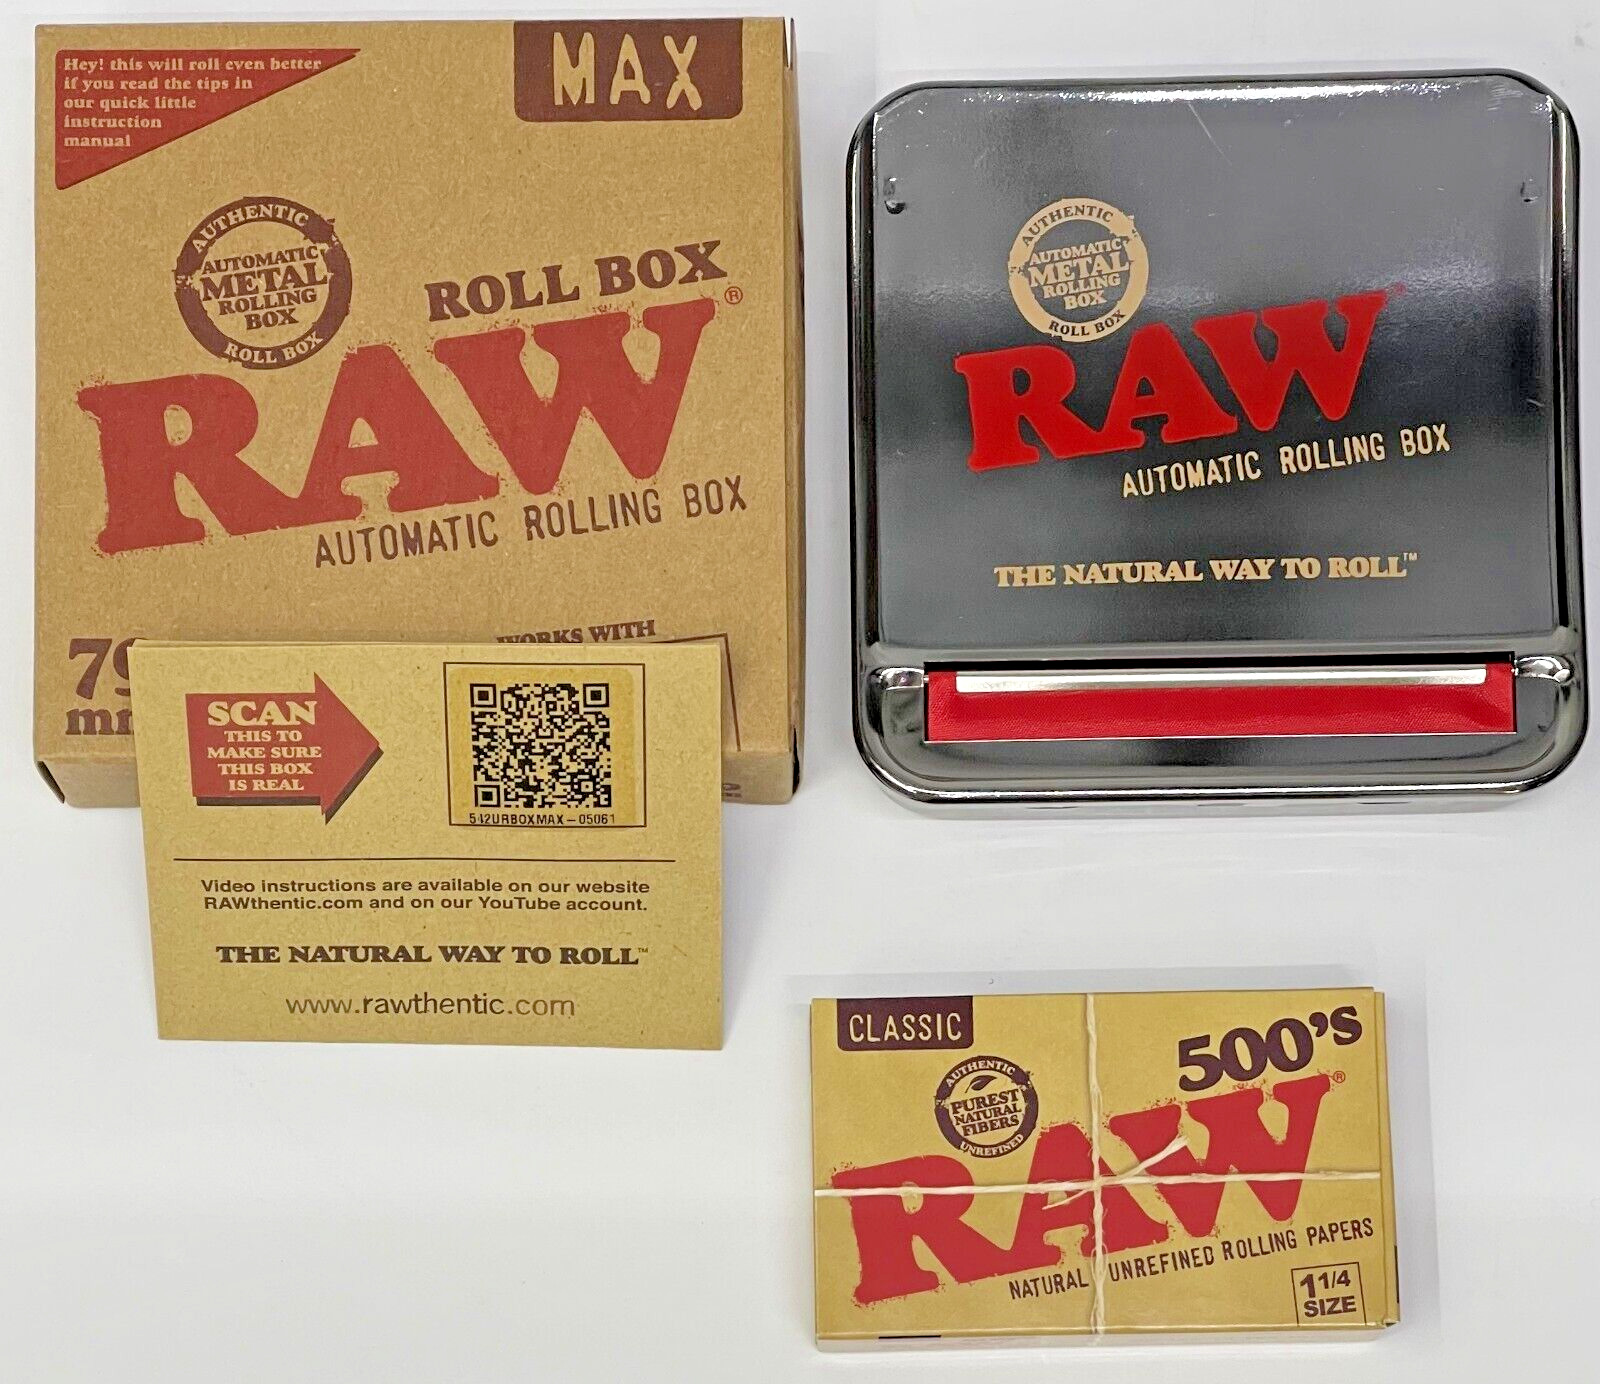 Raw Classic 500 Pack Cigarette Rolling Papers W/ Raw MAX RollBox *Free Shipping*